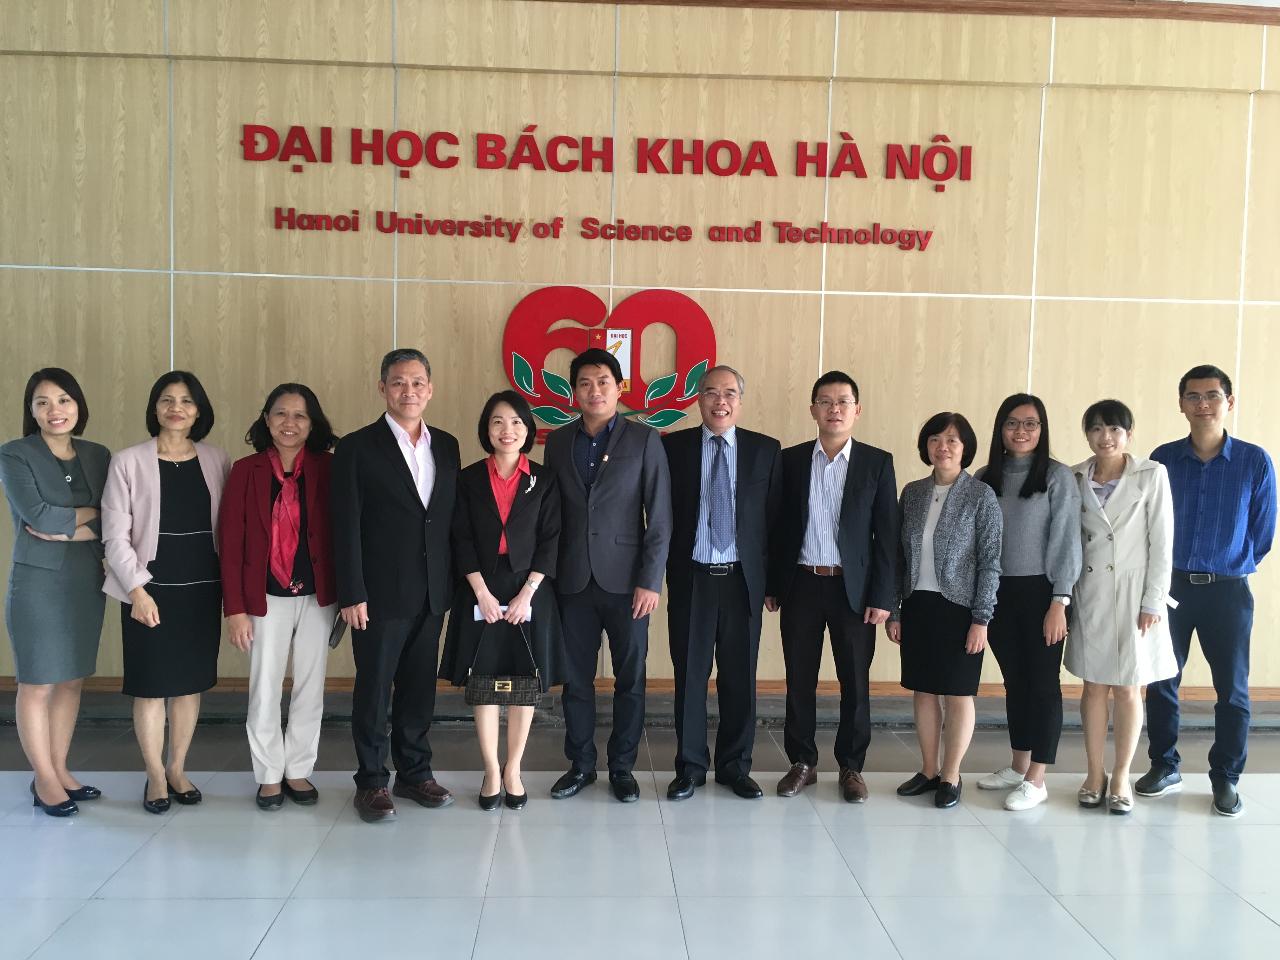 Ms.Jin-ling Chen, Deputy Representative of Taipei Economoic and Cultural Office (TECO), along with Ms. Yao-ling Wang, Secretary of TECO, attended a charter ceremony held at Hanoi University of Science and Technology (HUST) on Nov. 23. The ceremony was to celebrate the establishment of Vietnam branch center of APEC Research Center for Advanced Biohydrogen Technology (APEC-ACABT) at HUST. Prof. Dr. Shu-Yii Wu, President of APEC-ACABT, Dean of College of Engineering, Feng Chia University, hosted the said ceremony. 